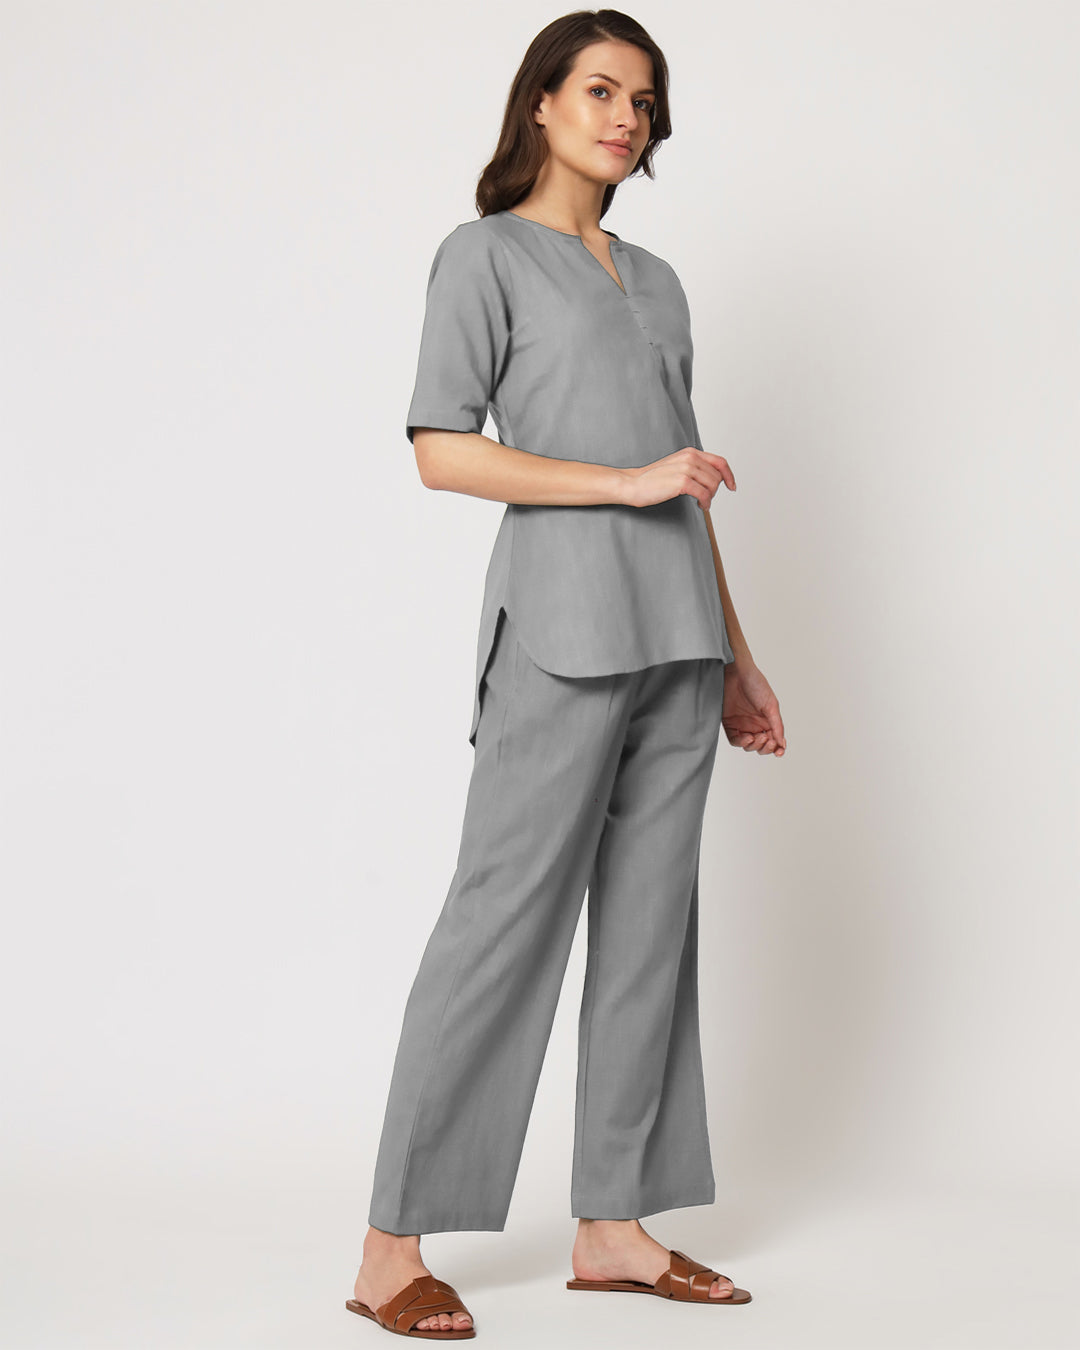 Iced Grey Collar Neck Short Length Solid Co-ord Set